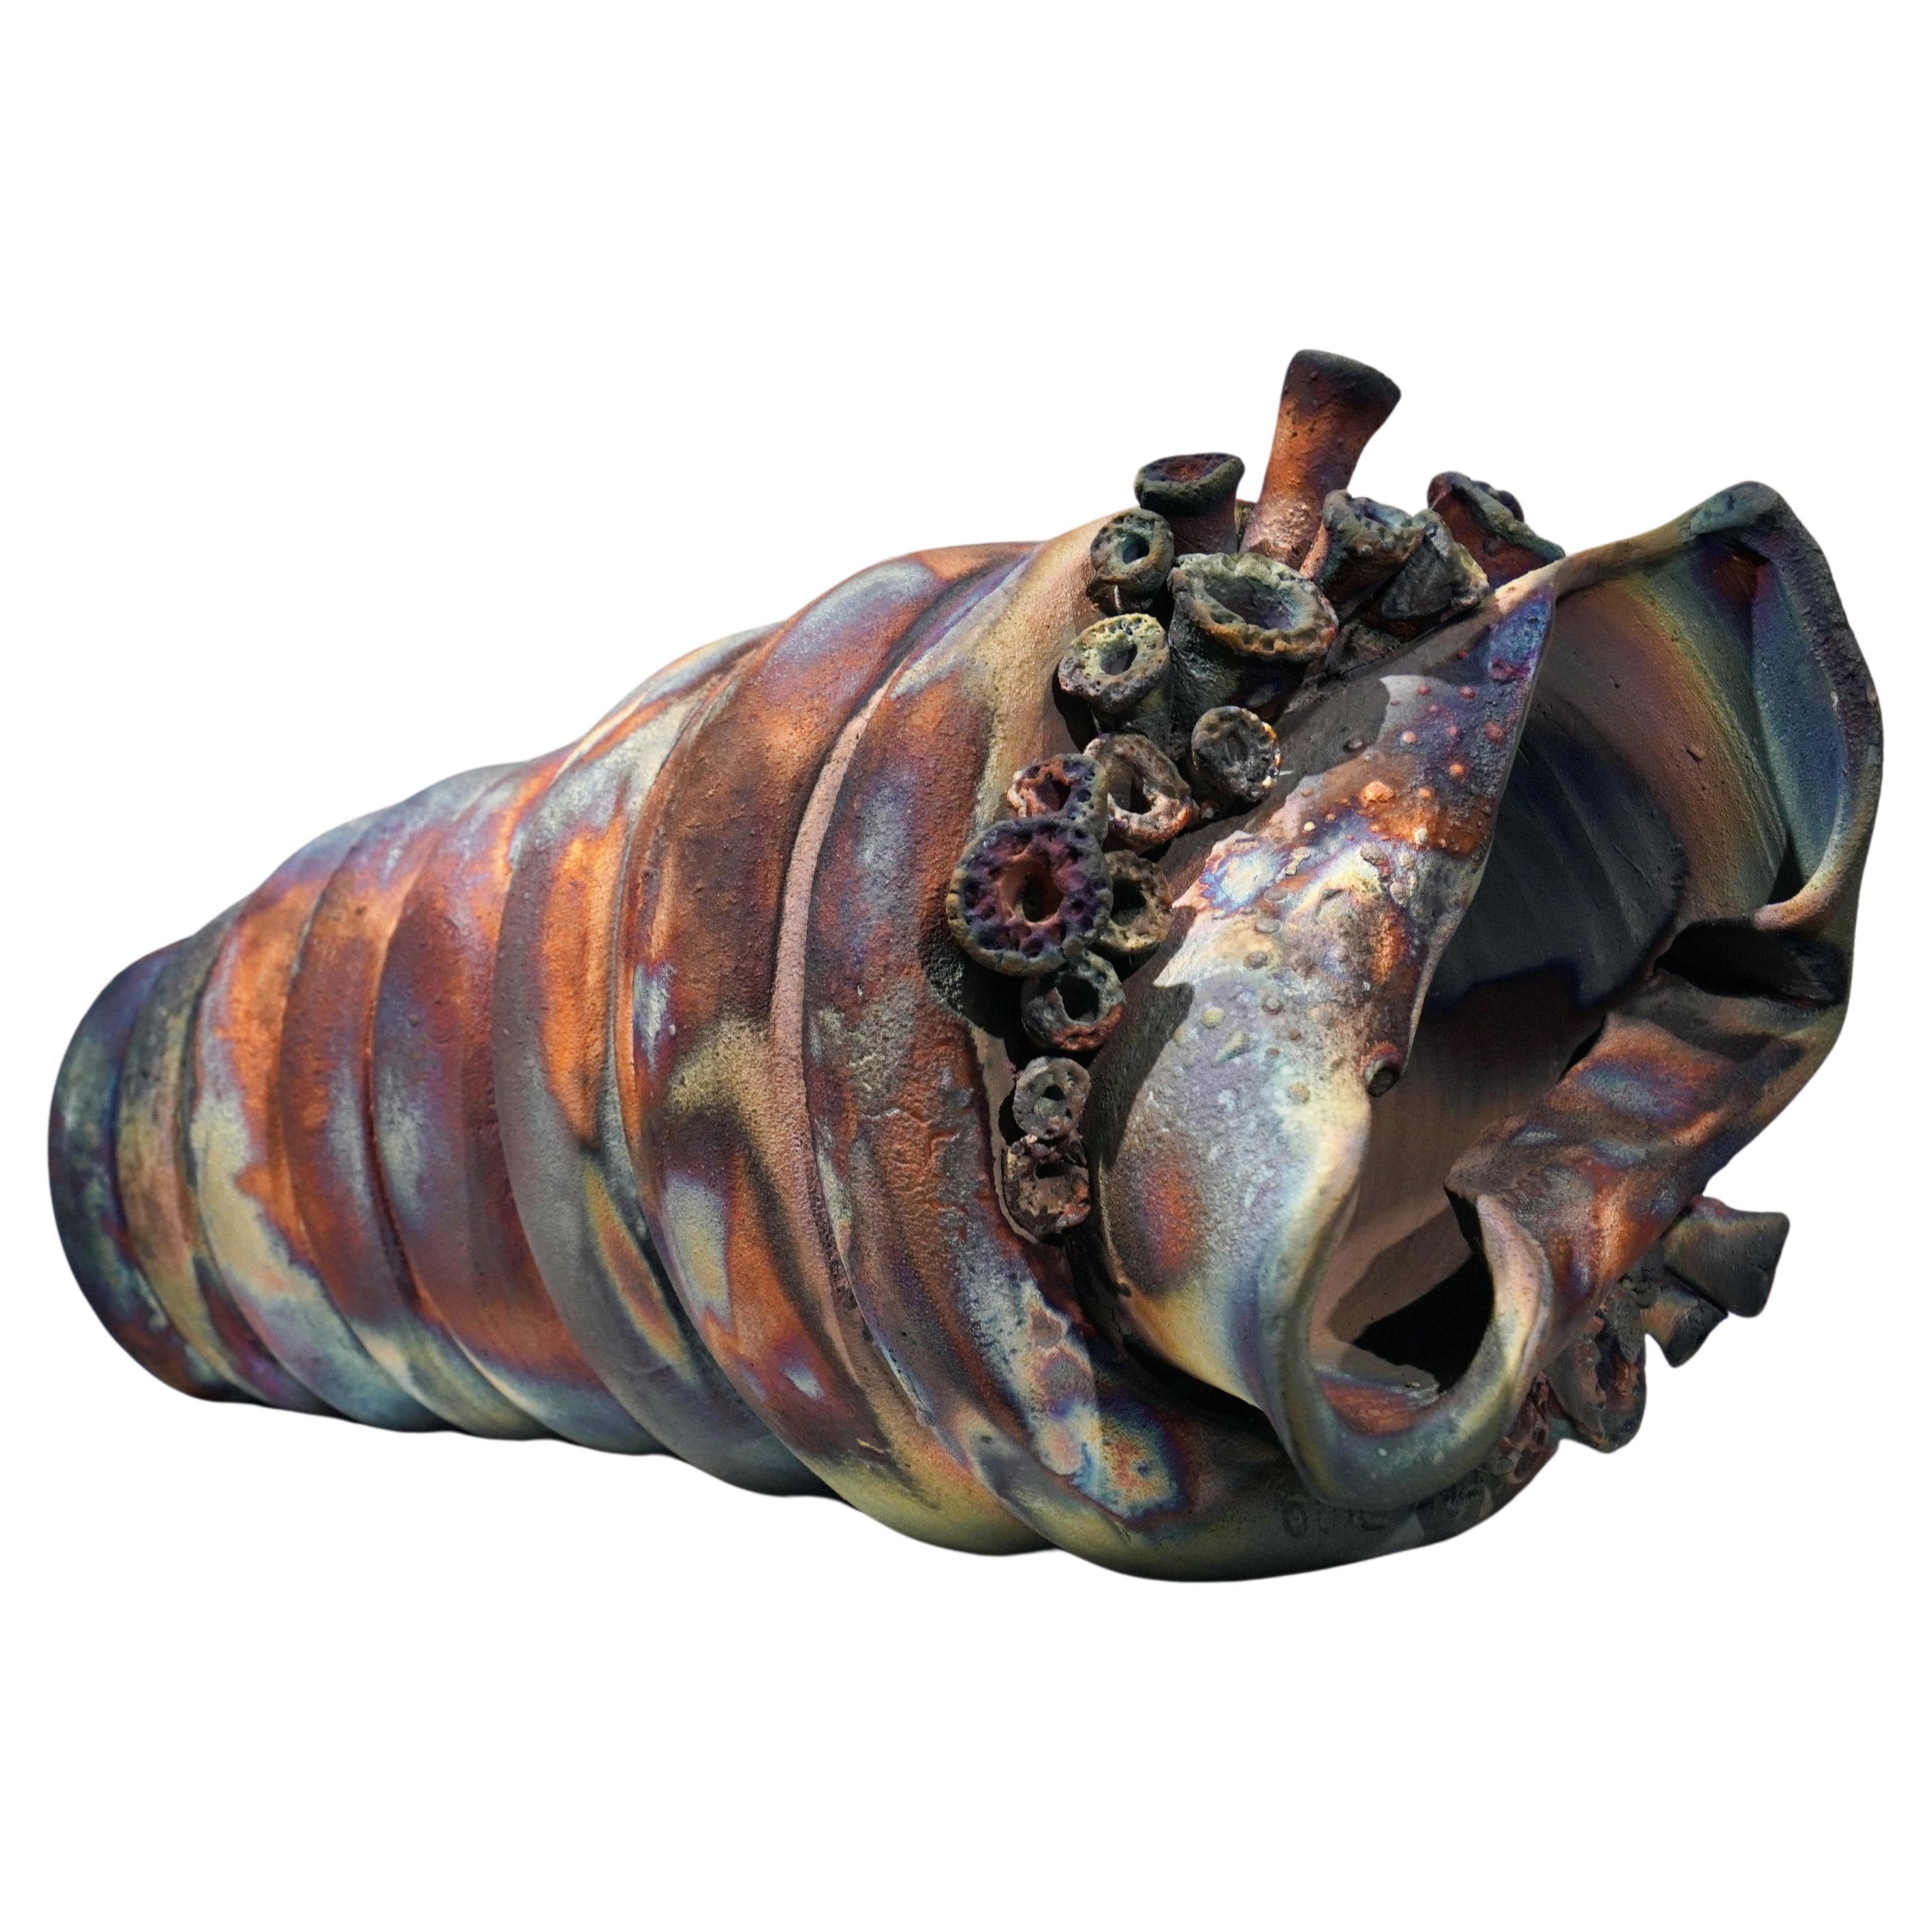 Home - life magnified collection raku ceramic pottery sculpture by Adil Ghani For Sale